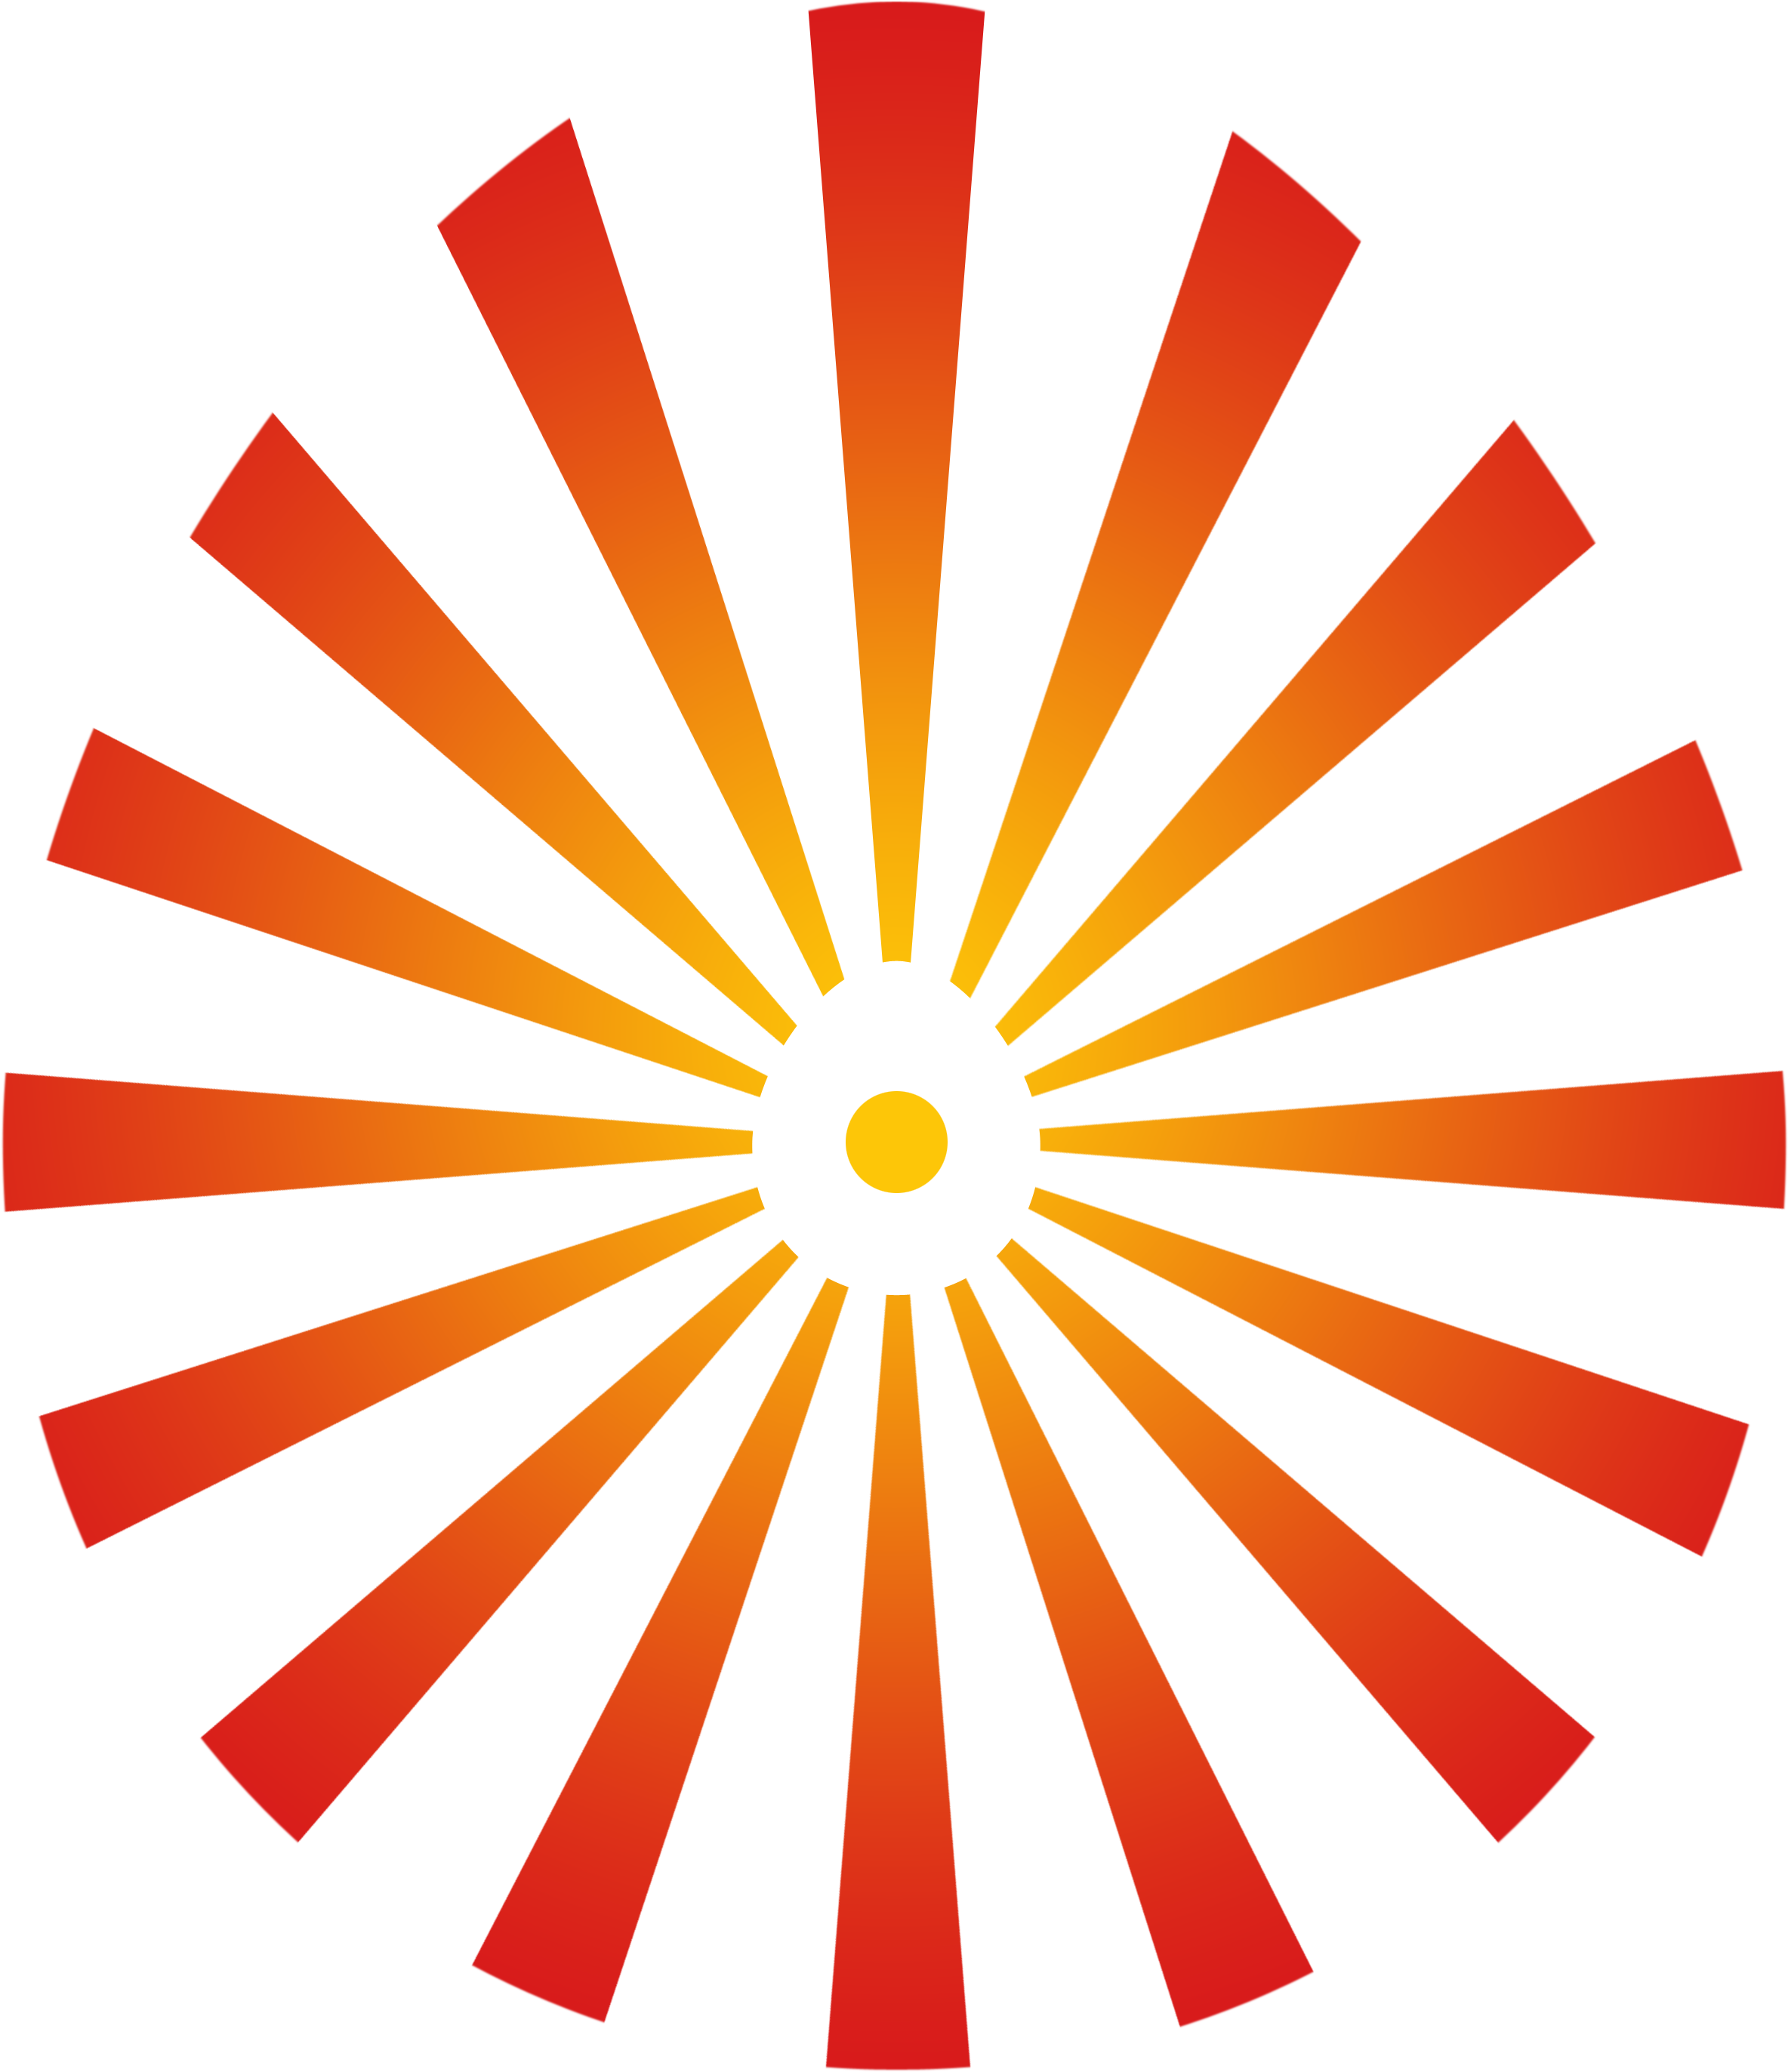 A Circular Design With Orange And Yellow Stripes